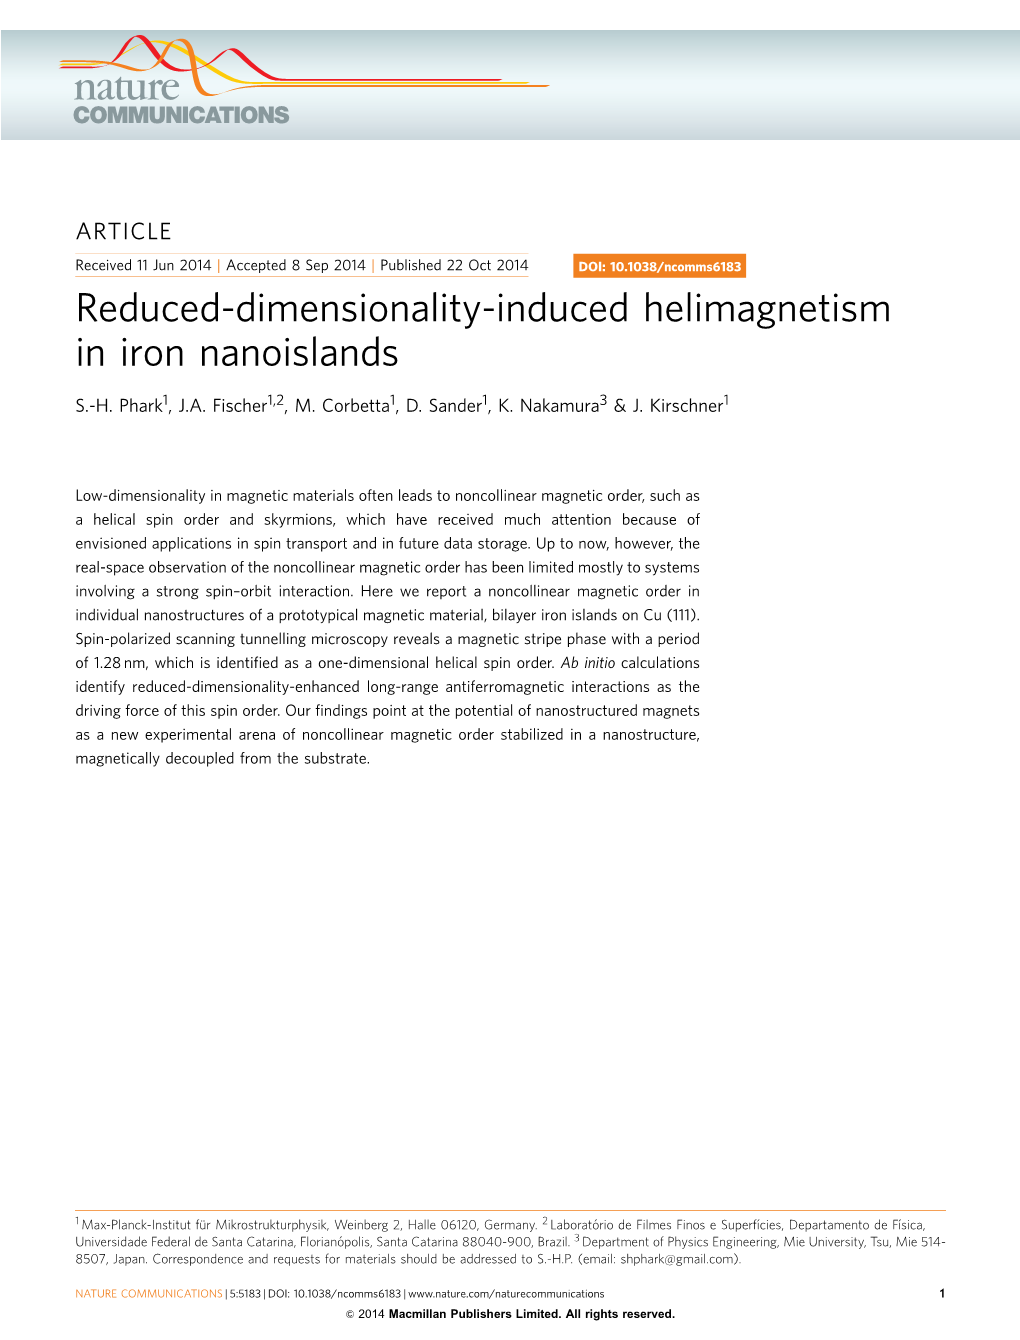 Reduced-Dimensionality-Induced Helimagnetism in Iron Nanoislands